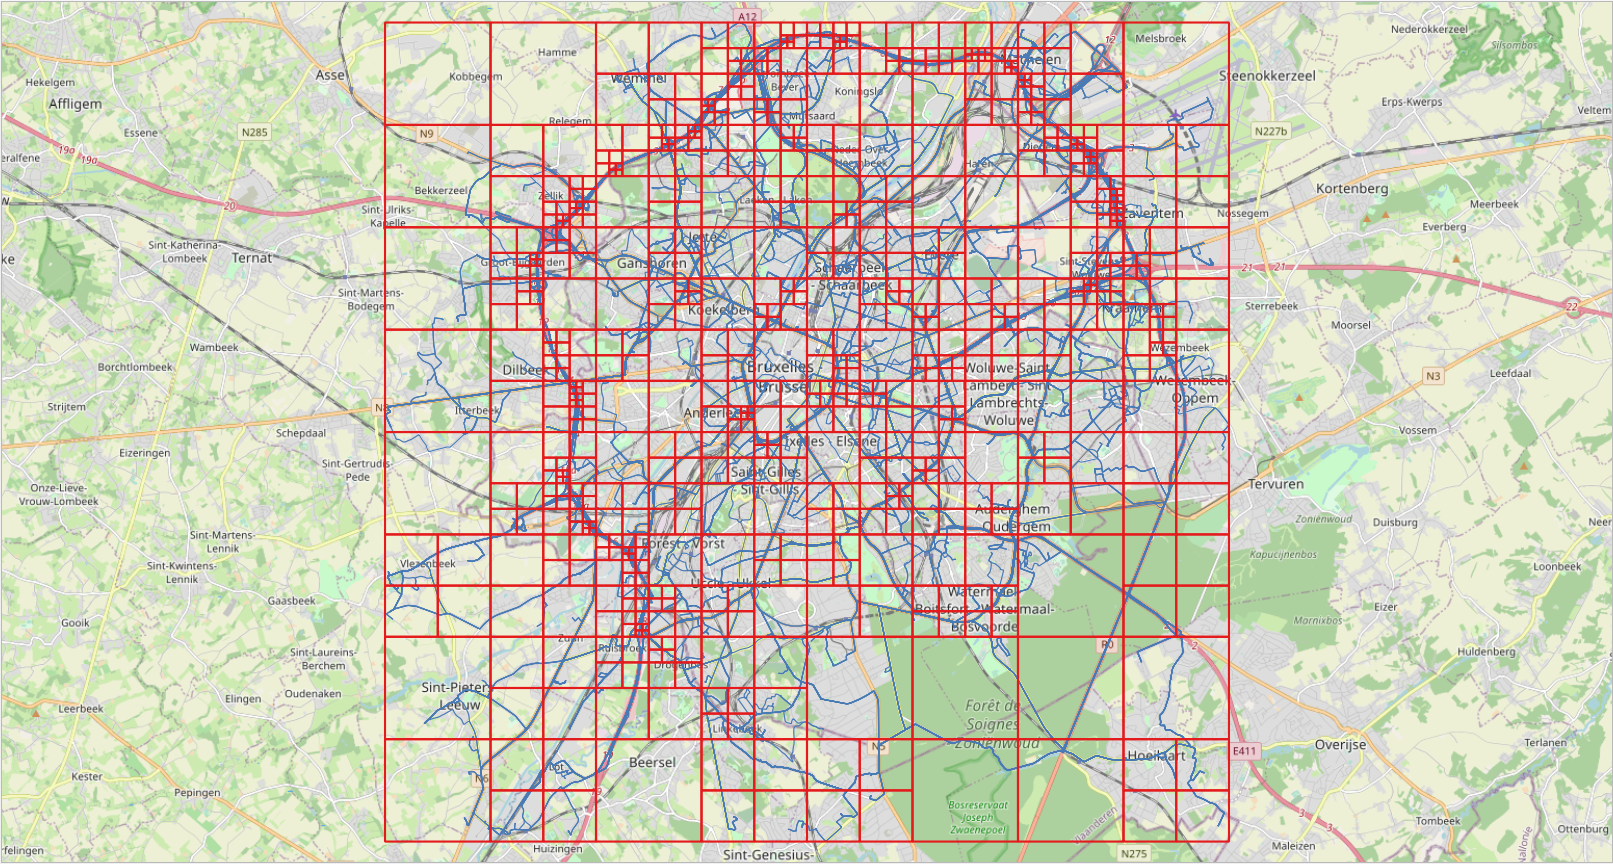 Multiresolution grid on Brussels data obtained using the BerlinMOD generator. Each cell contains at most 10,000 (left) and 1,000 (right) instants across the entire simulation period (four days in this case). On the left, we can see the high density of the traffic in the ring around Brussels, while on the right we can see other main axes in the city.